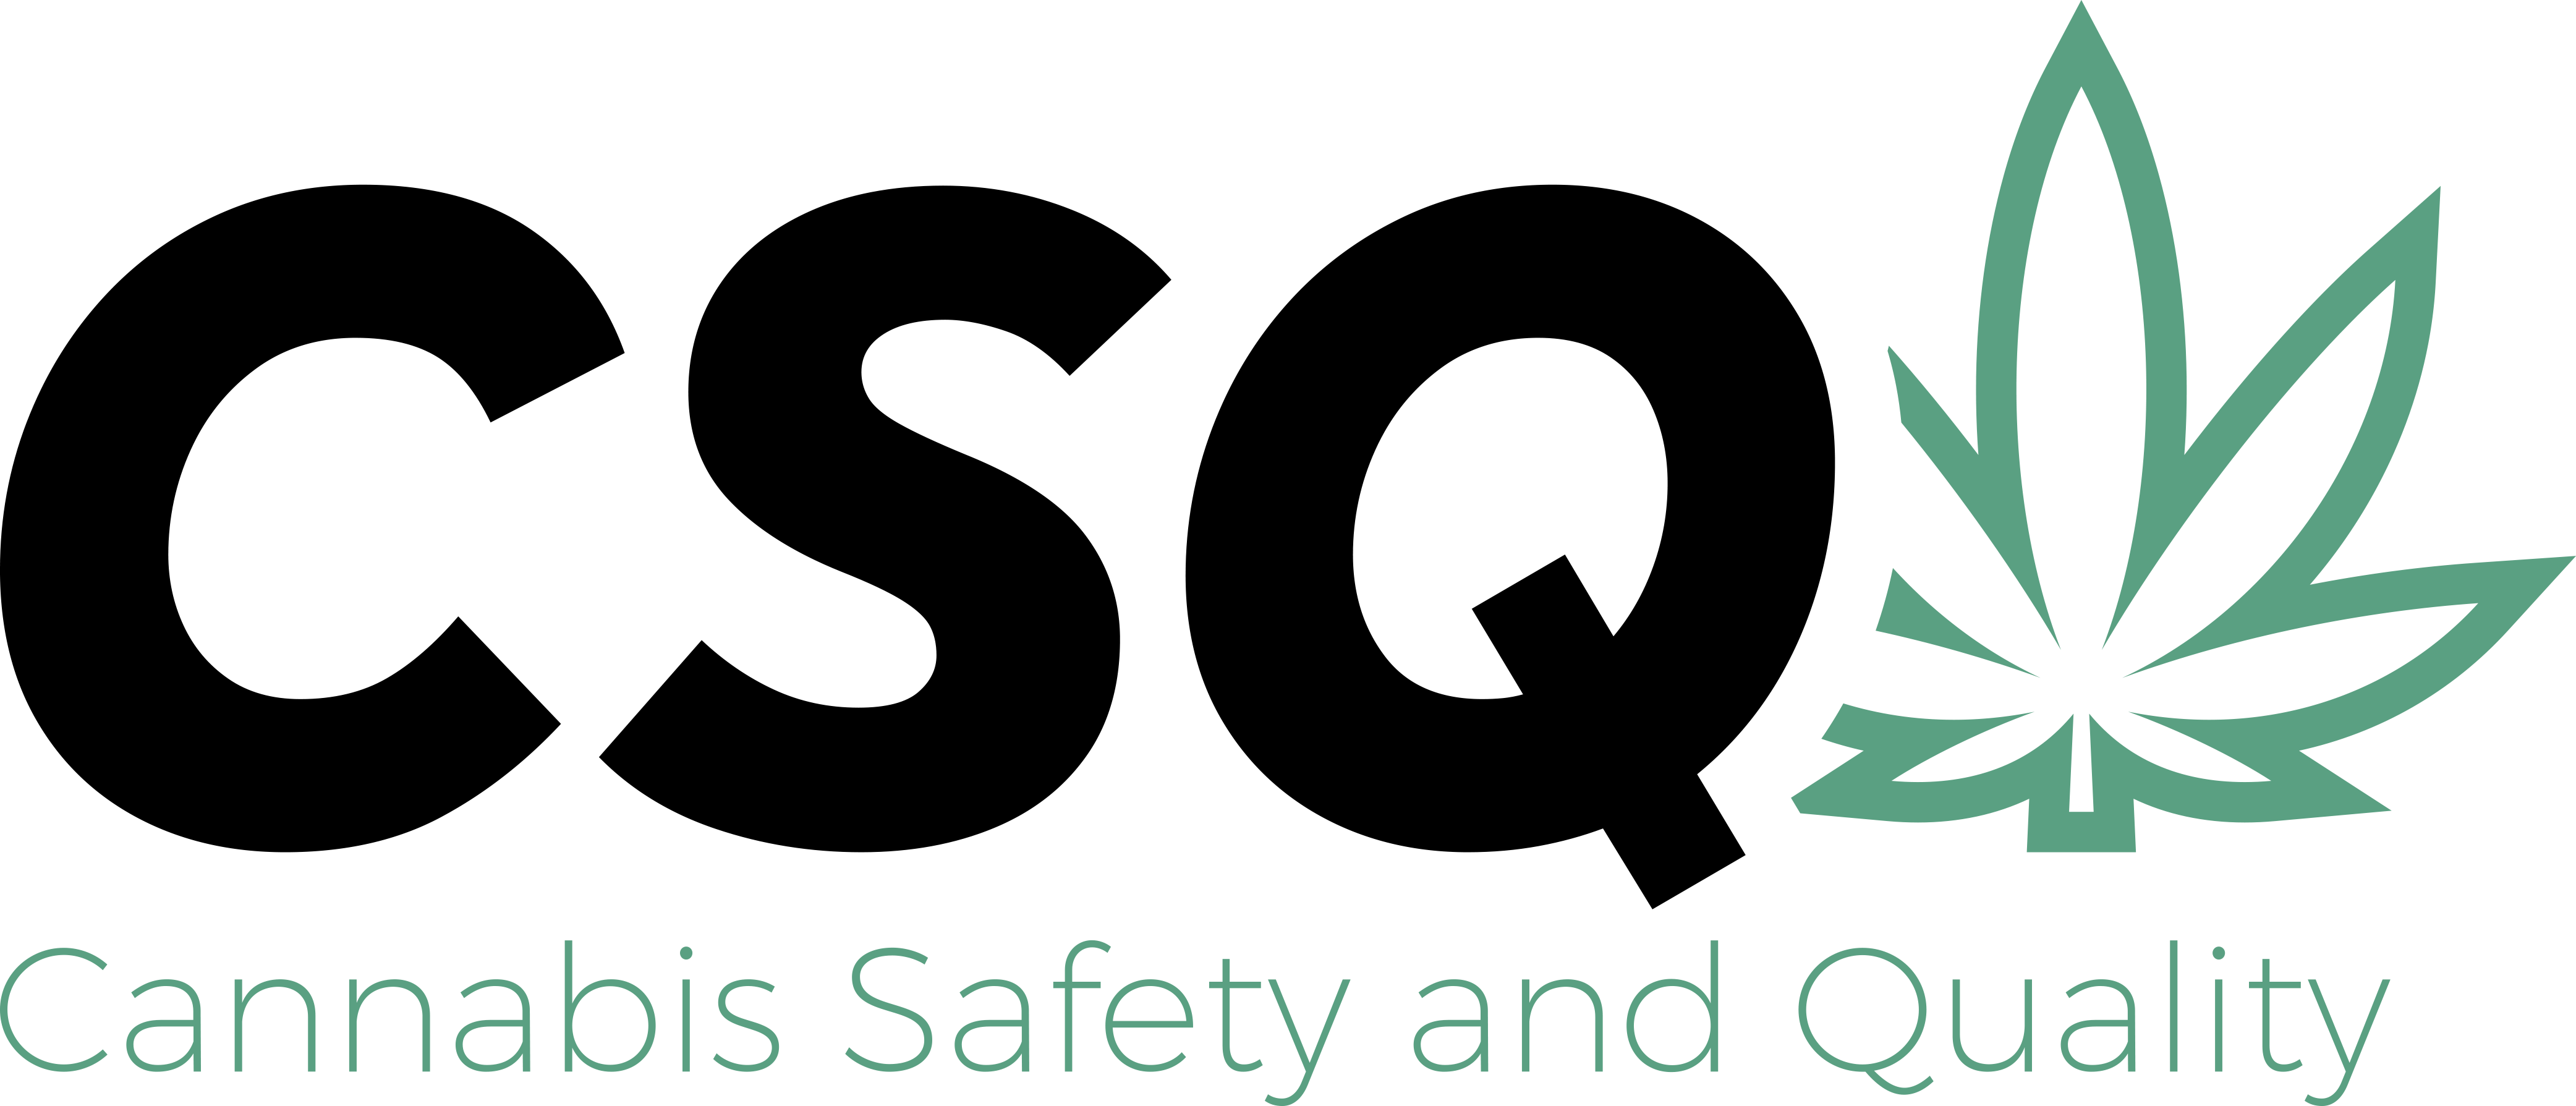 Online Training: Cannabis Safety & Quality